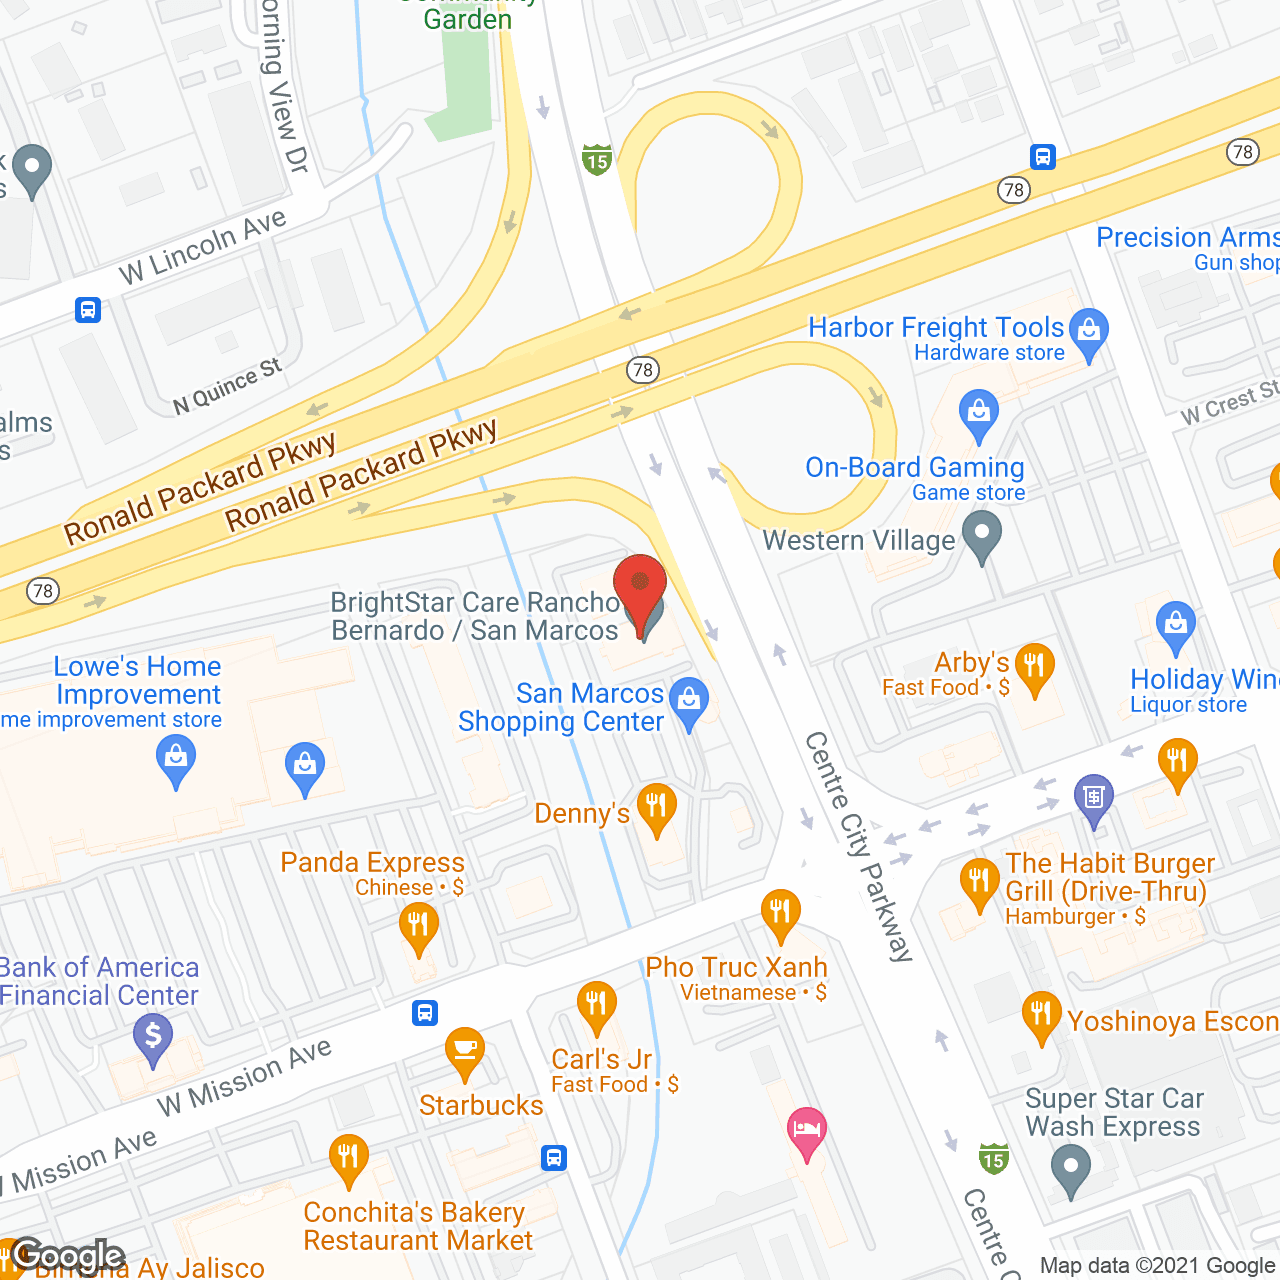 BrightStar Care of Escondido and San Marcos in google map